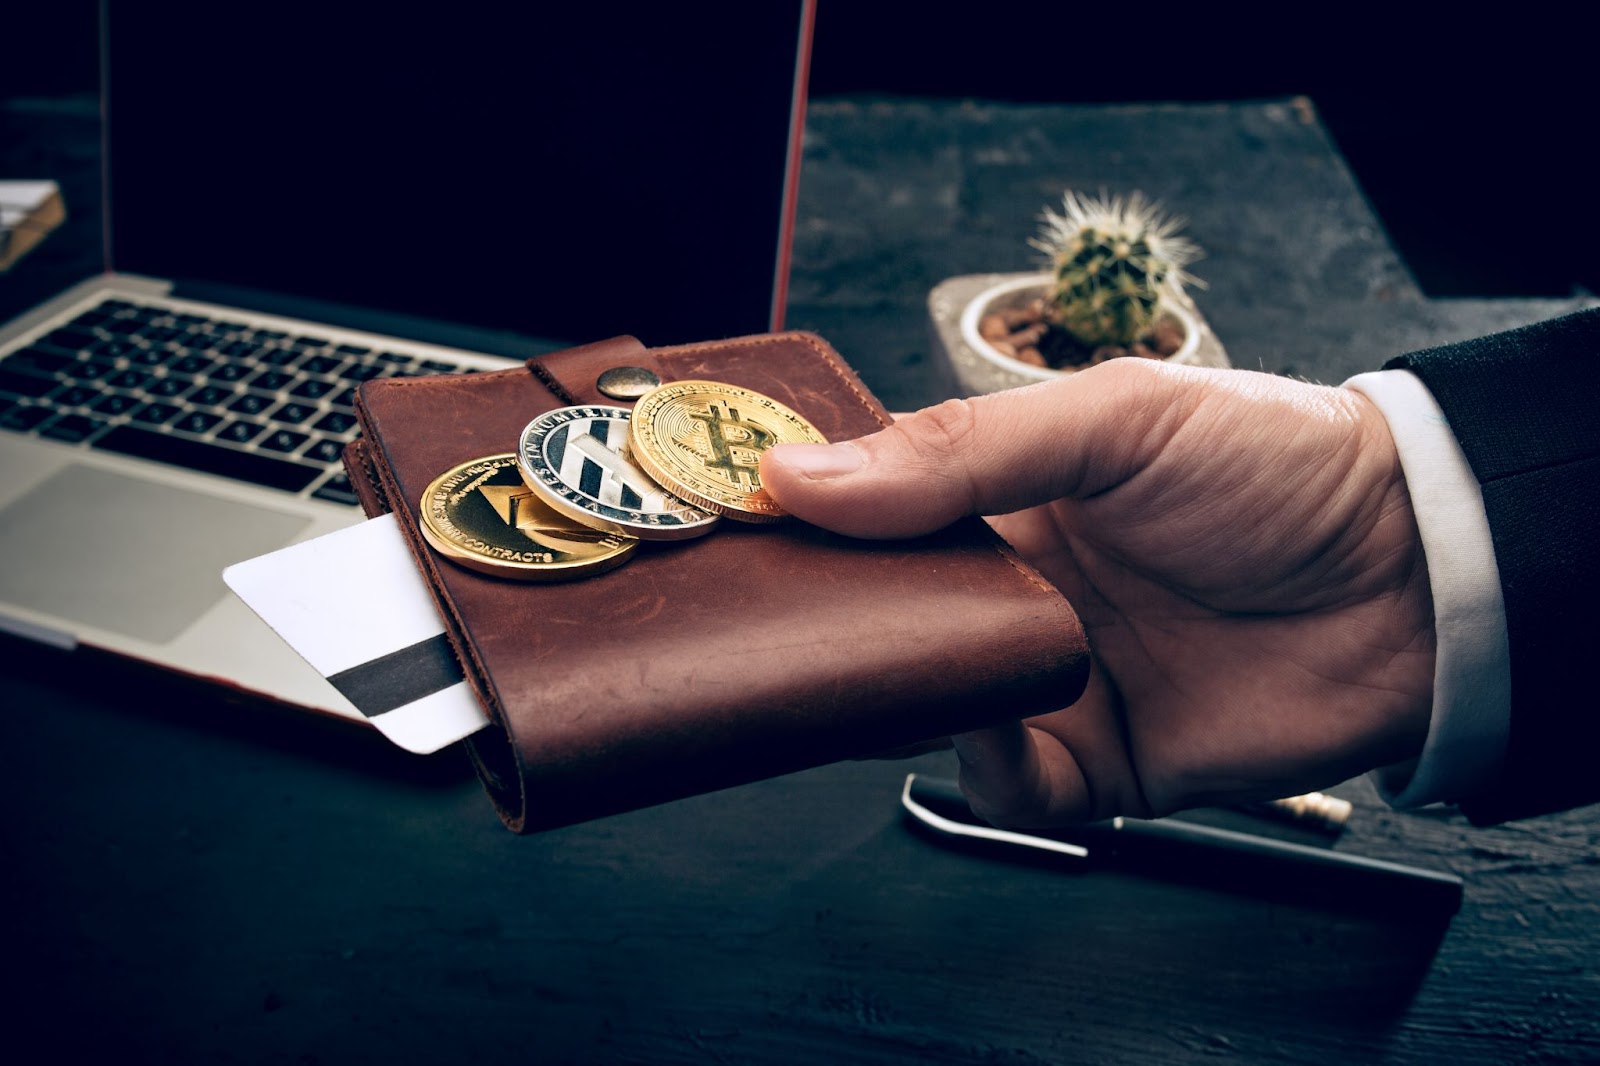 A men's hand is holding a wallet with crypto coins and payment card. Behind there is a laptop.
